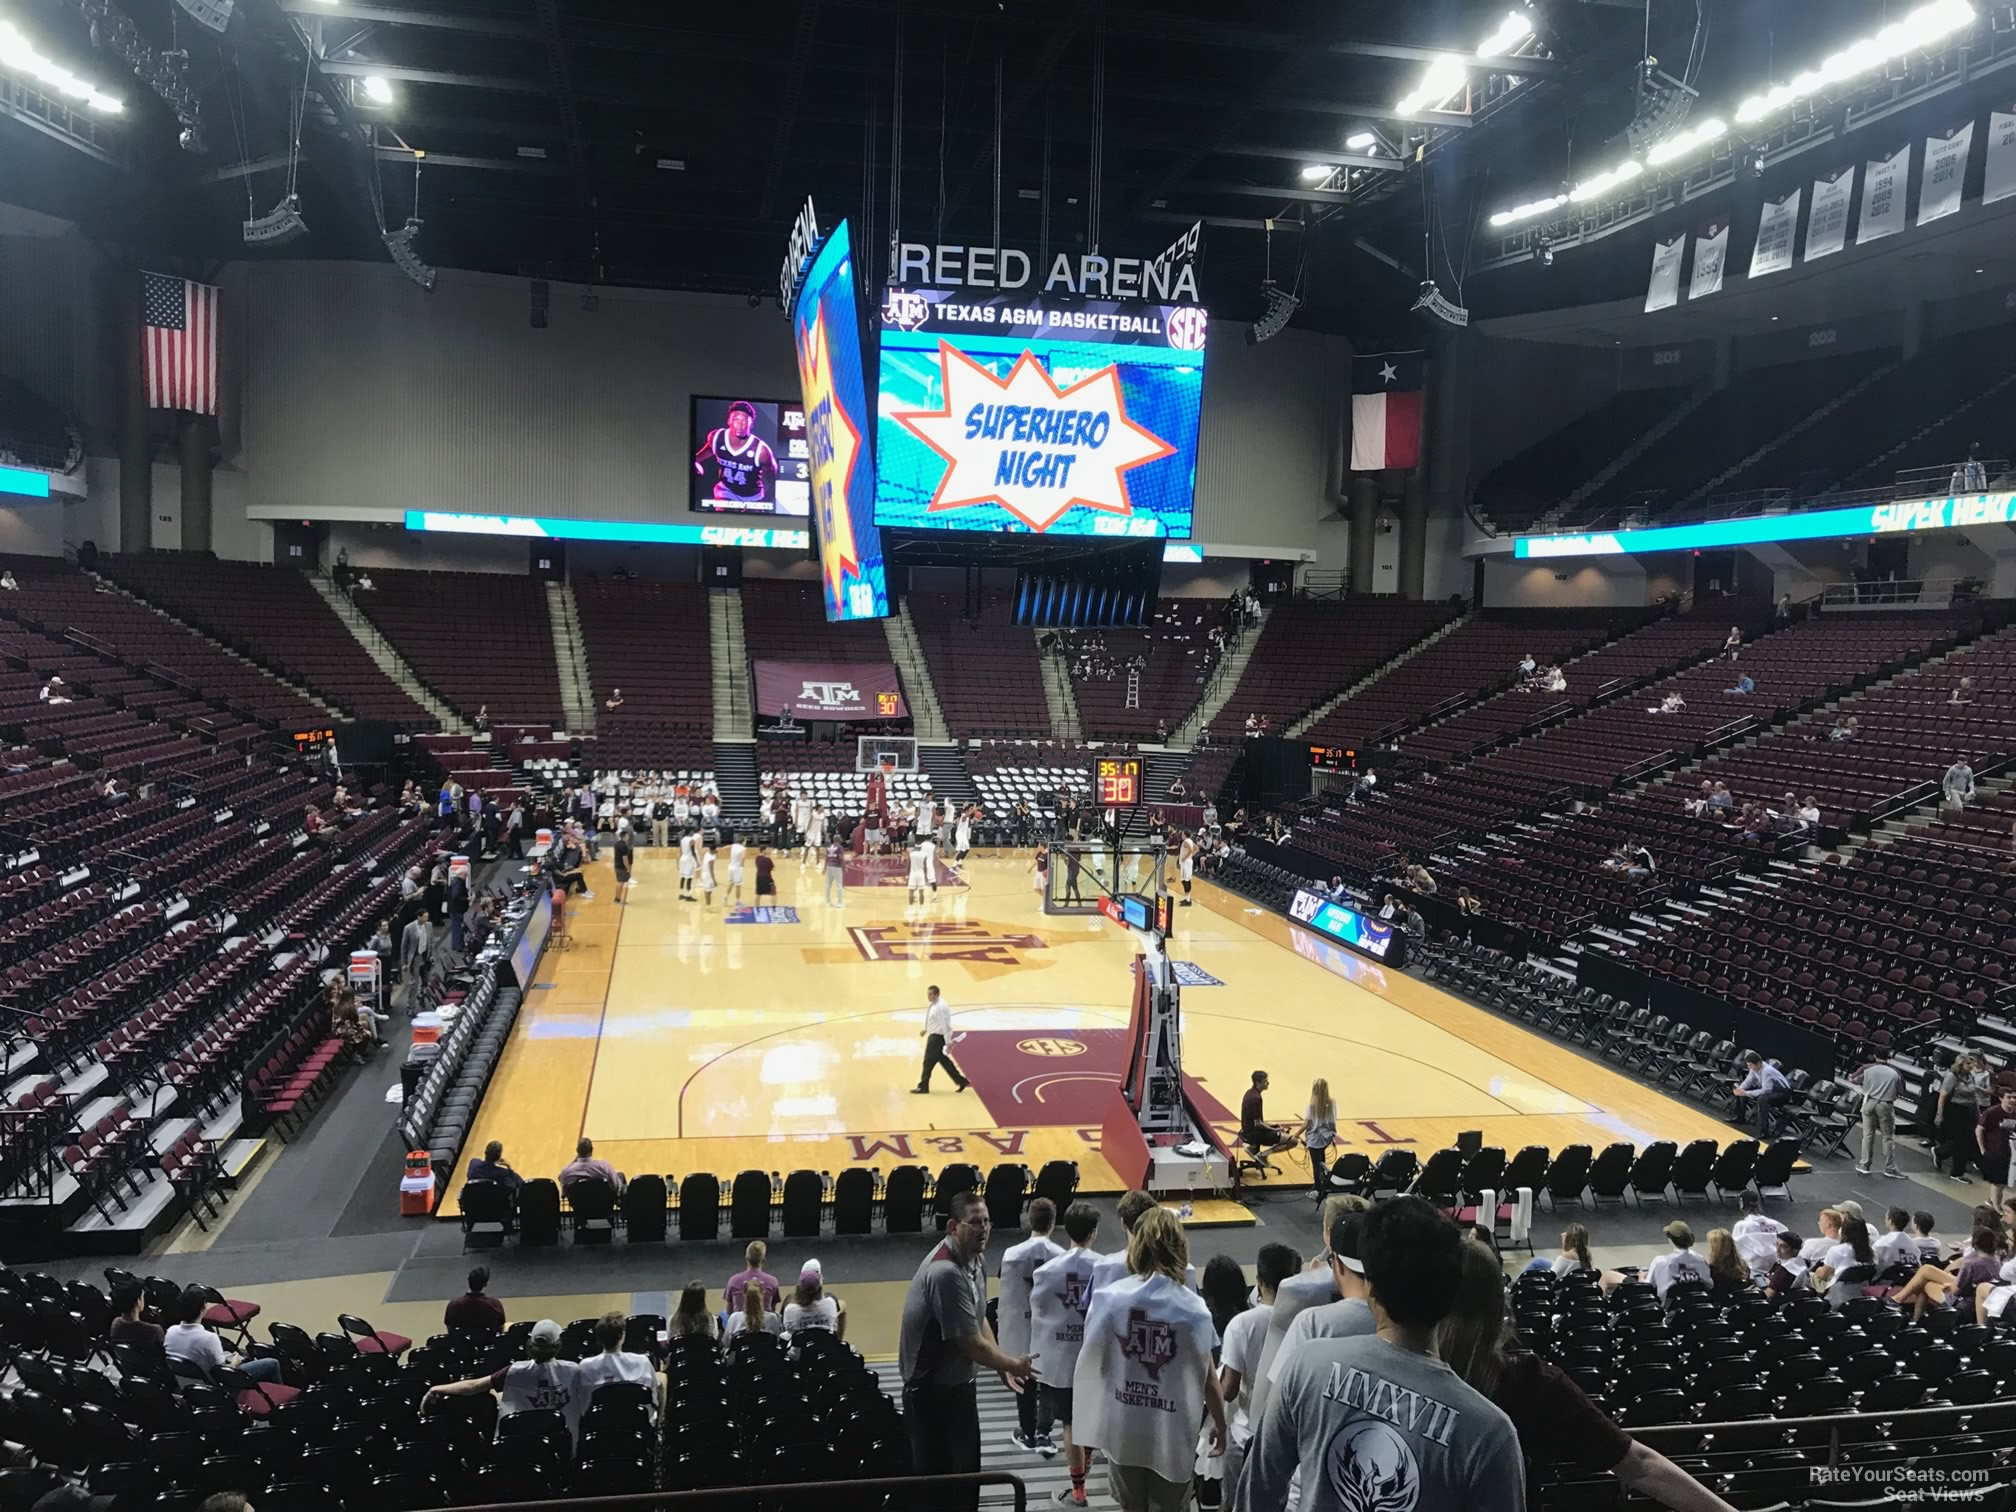 section 114, row j seat view  - reed arena